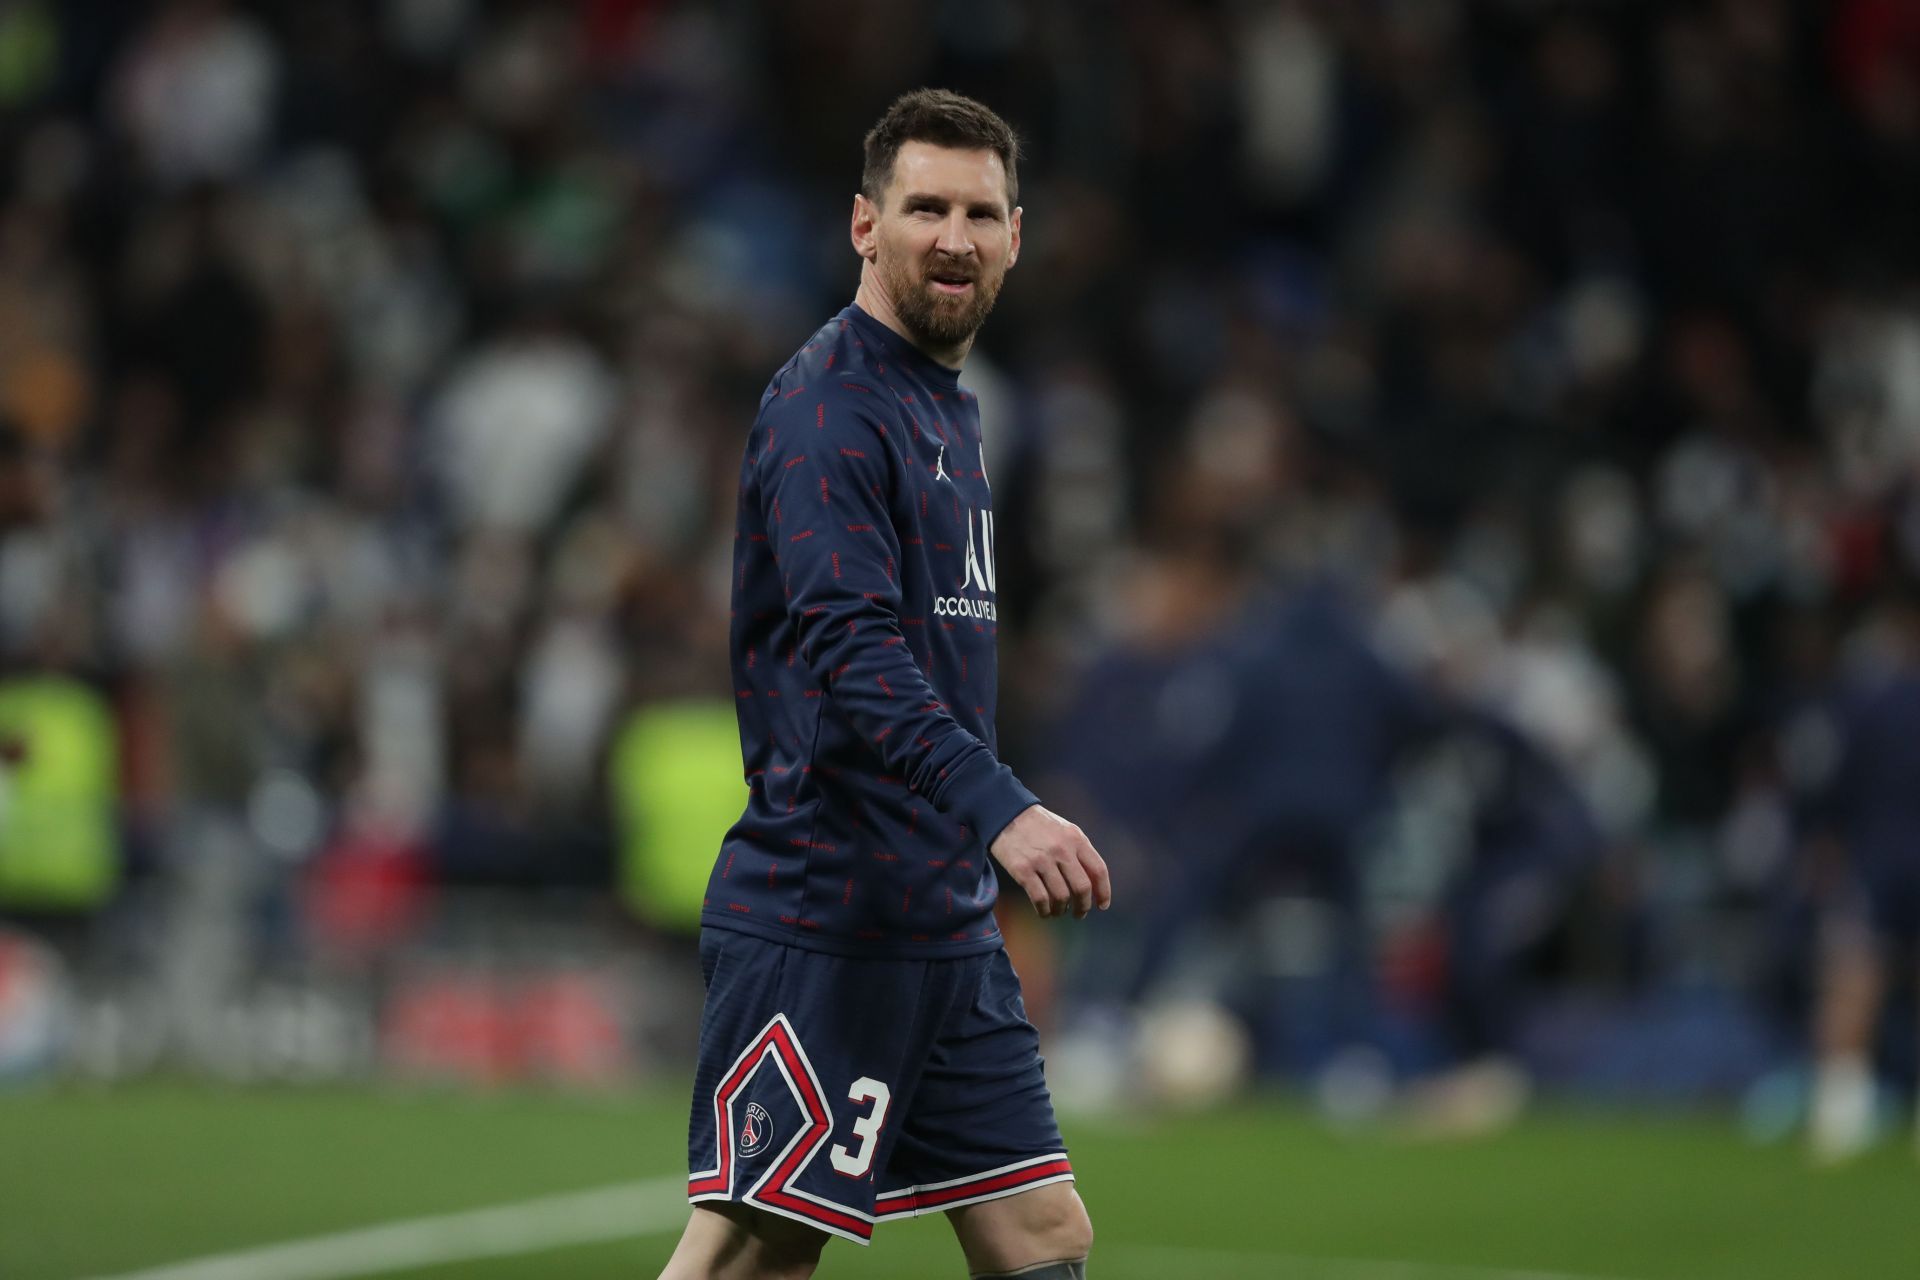 Lionel Messi has struggled to find his footing in France.